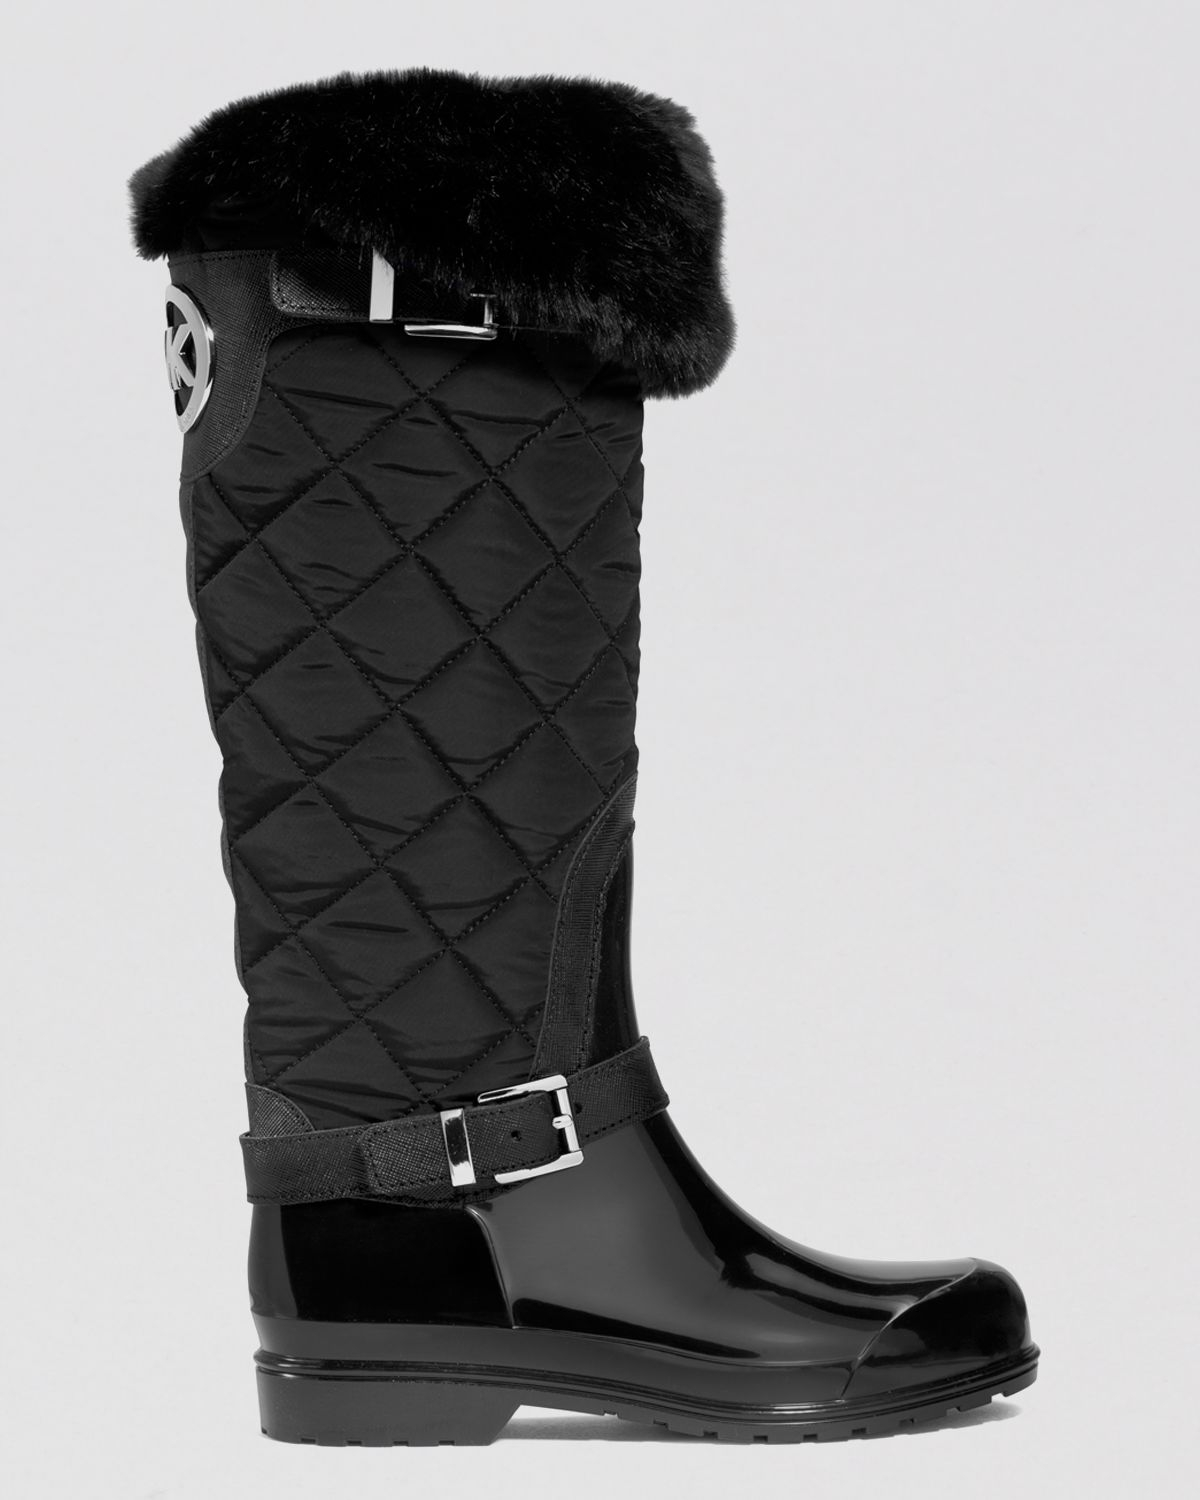 Lyst - Michael Michael Kors Cold Weather Rain Boots - Fulton Quilted in ...